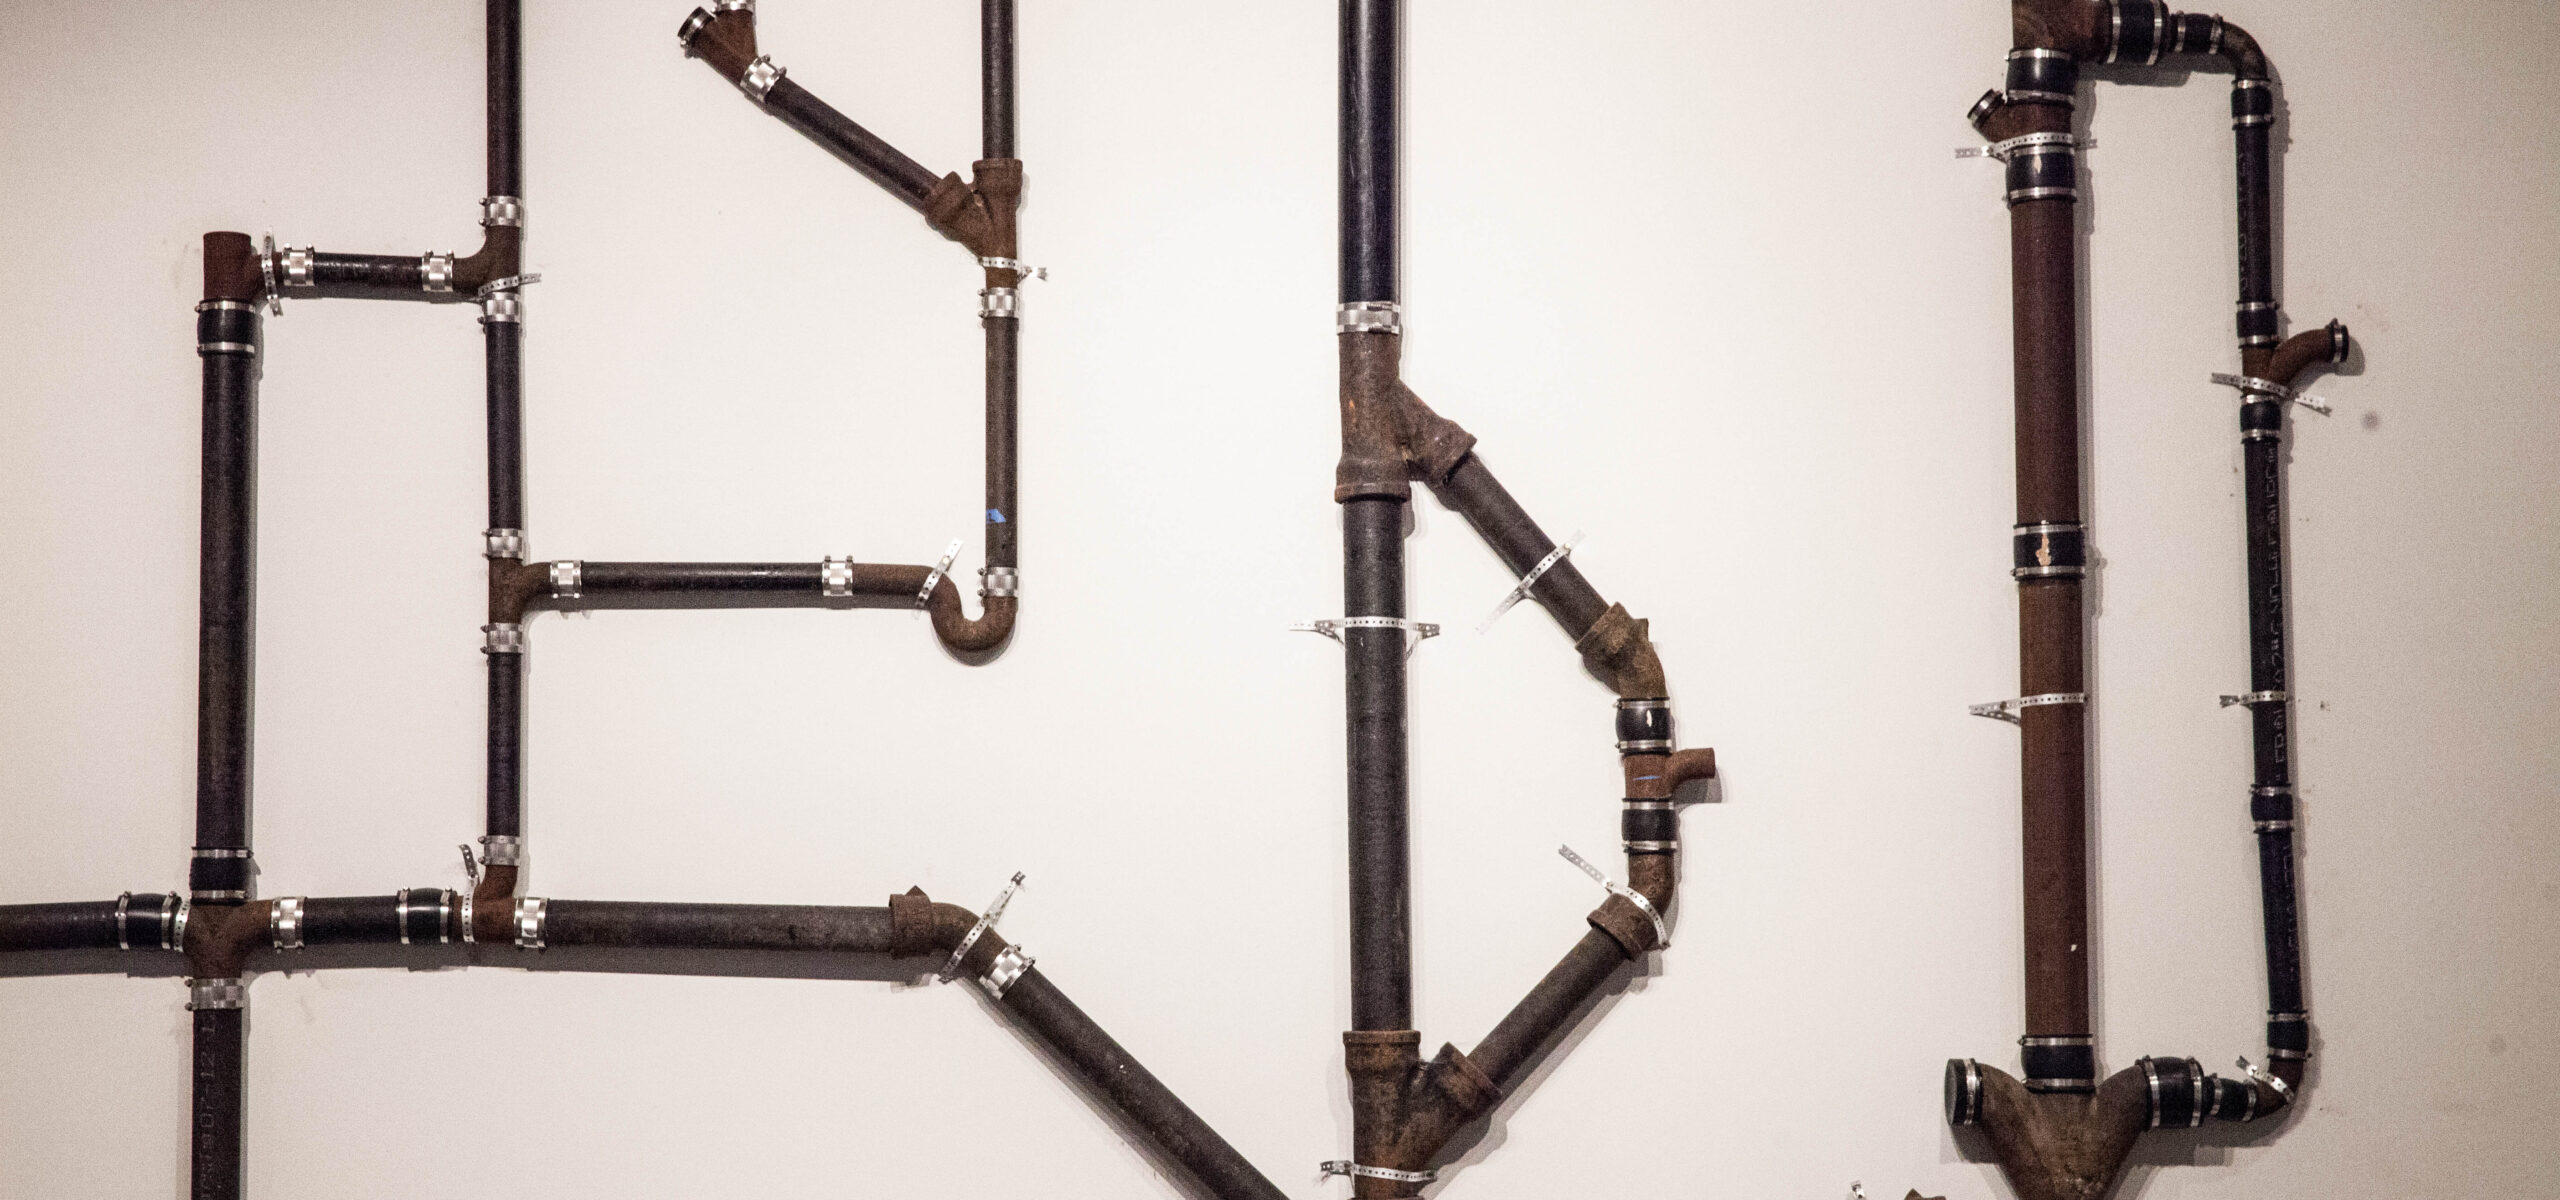 Plumbing pipes hung vertically on wall